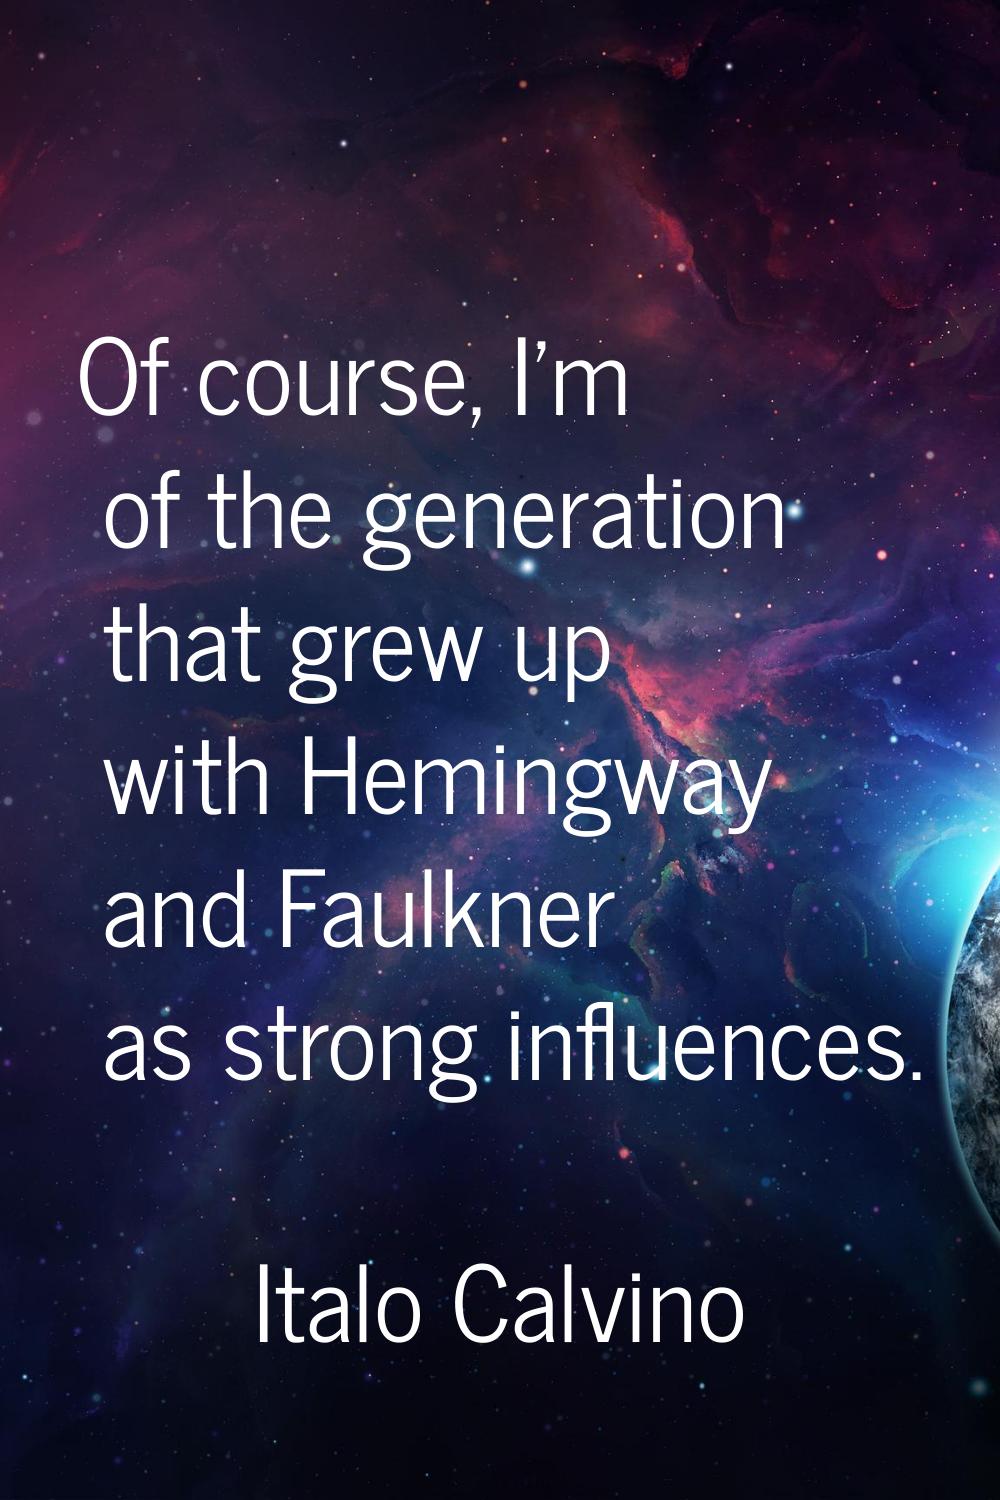 Of course, I'm of the generation that grew up with Hemingway and Faulkner as strong influences.